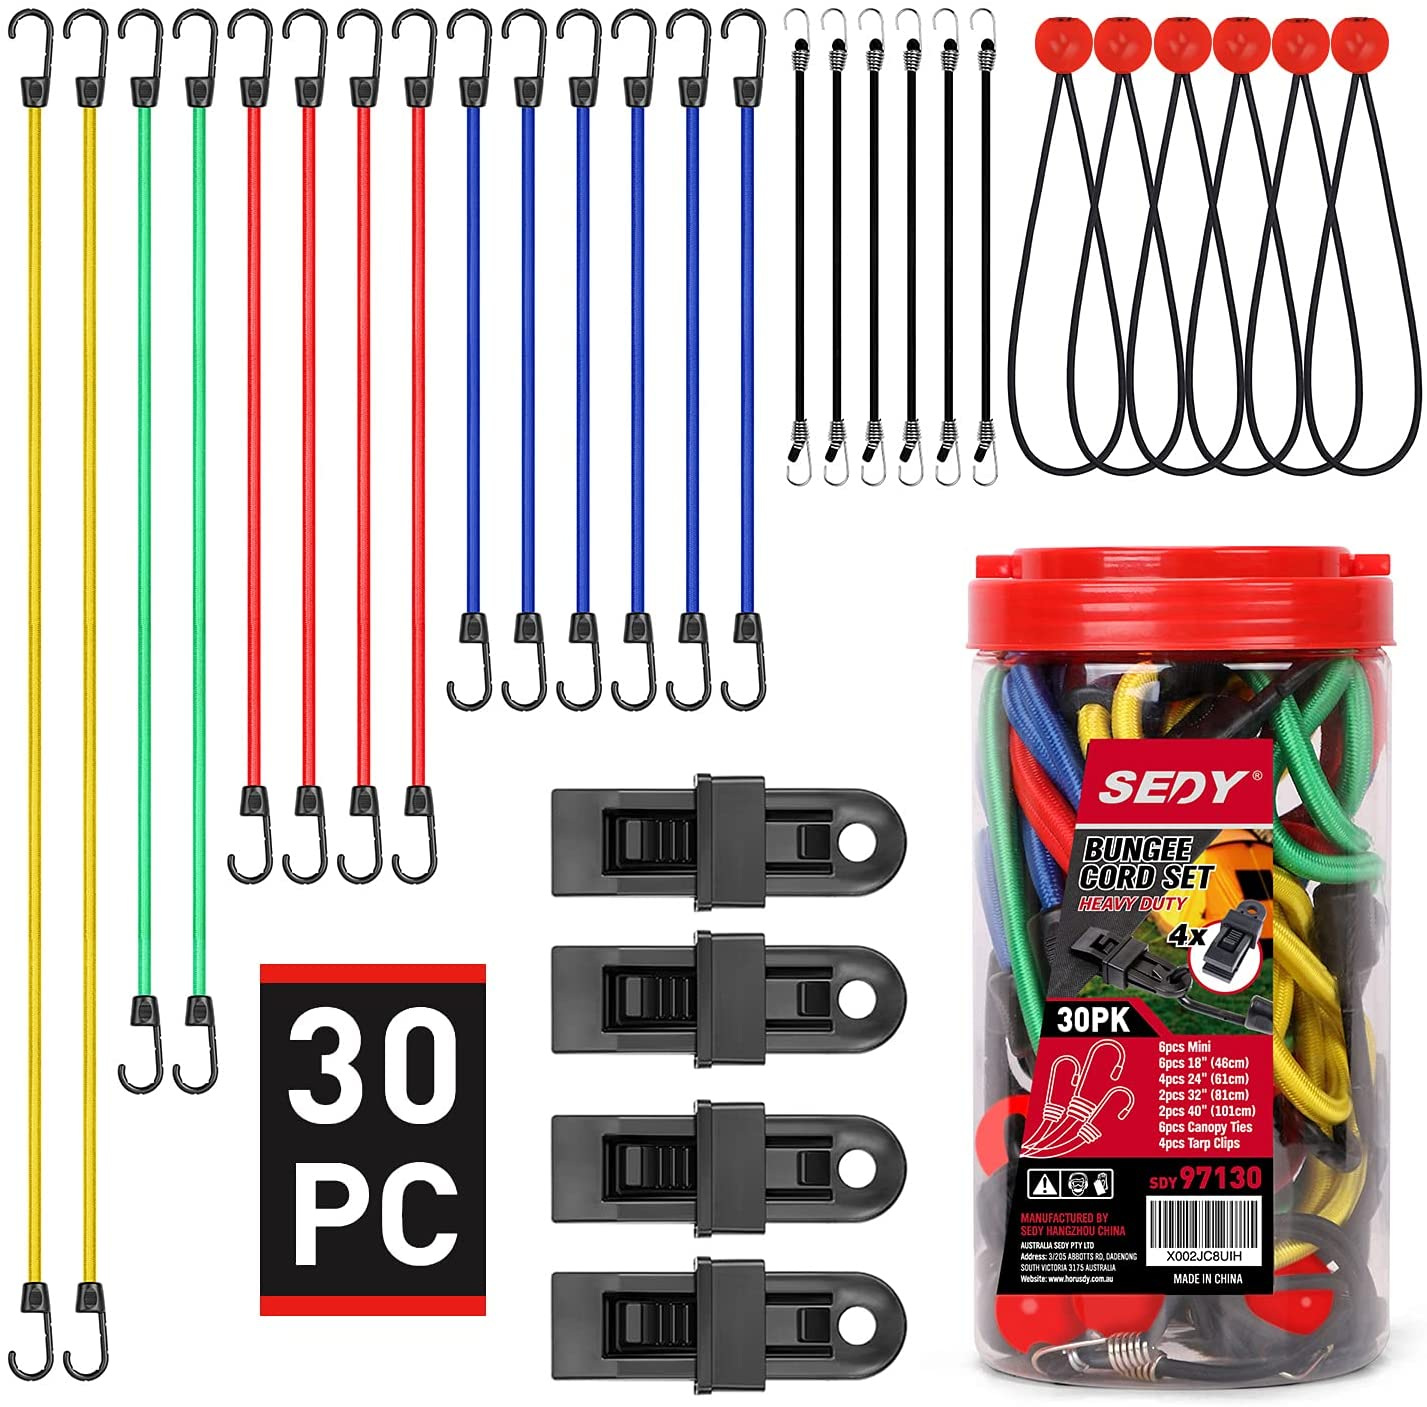 30-Pieces Premium Bungee Cords Assortment Jar, Includes 10”, 18”, 24”, 32”, 40” Bungee Cords & 8” Canopy/Tarp Ball Ties & 4 Crocodile Mouth Tarp Clips